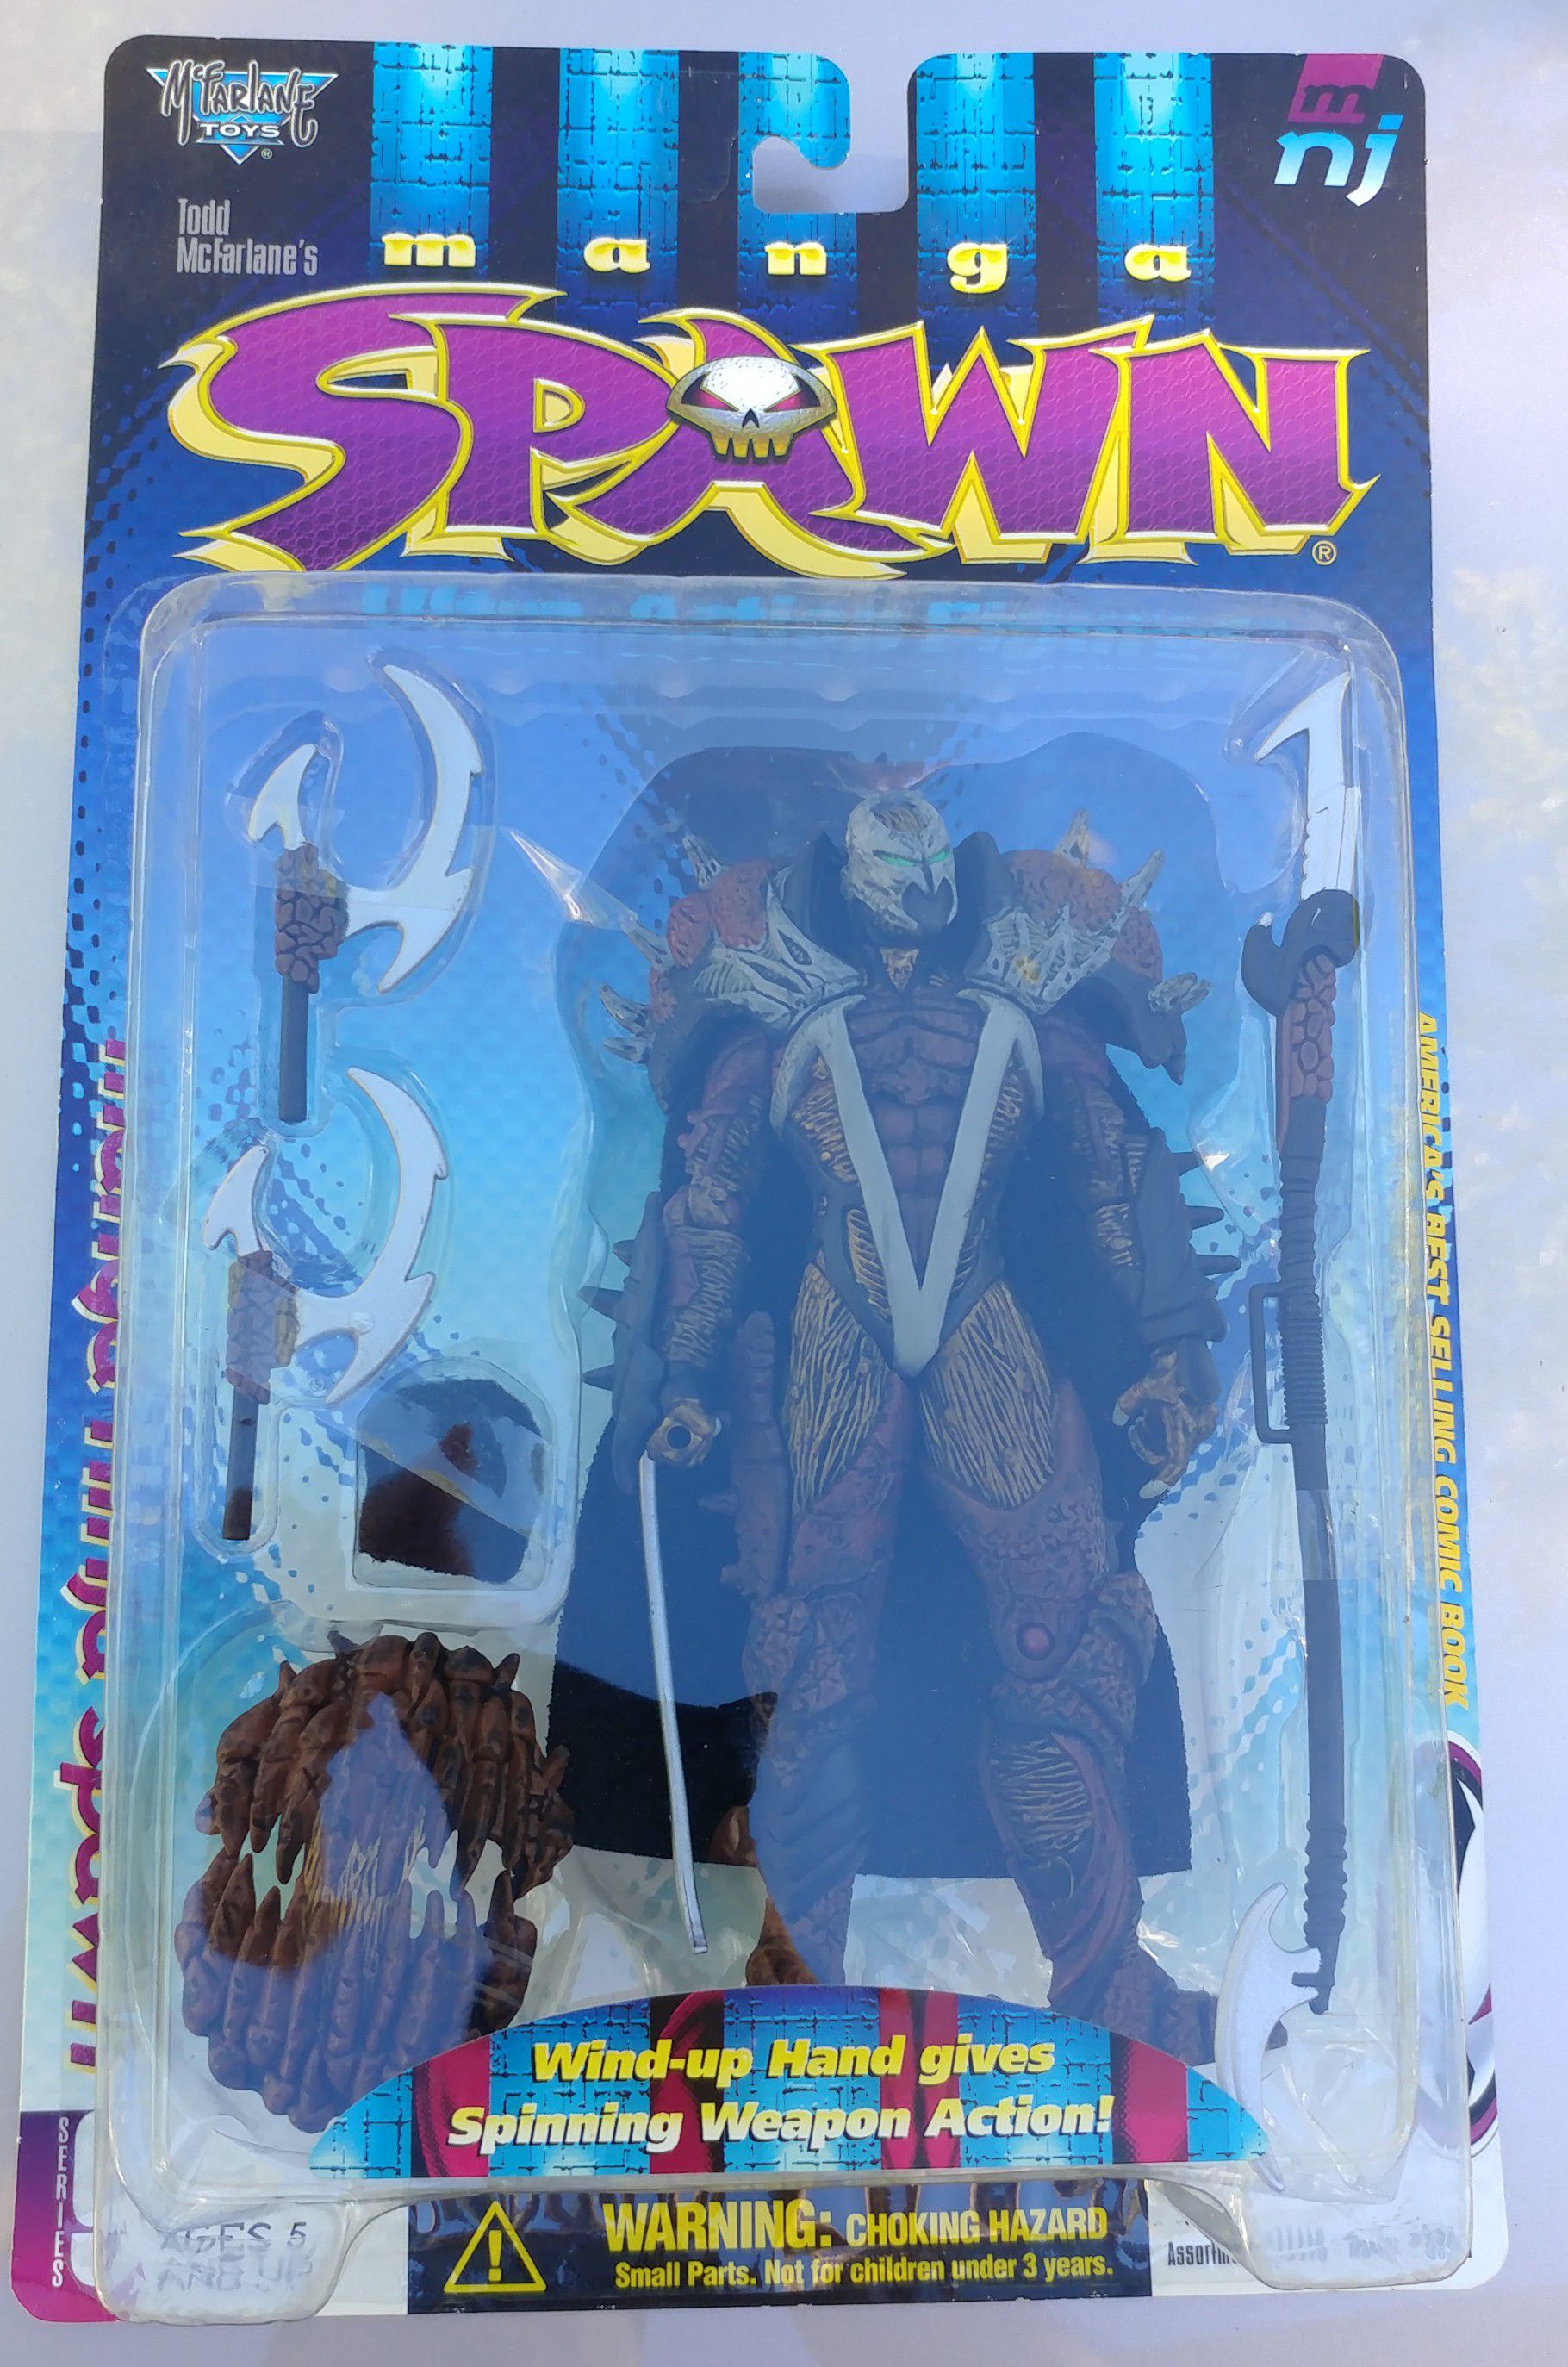 SPAWN THE MOVIE - MCFARLANE TOYS COLLECTIBLE ACTION FIGURES (LOT OF 26) OR INDIVIDUAL SALE - ALL NEW IN BOXES!!!